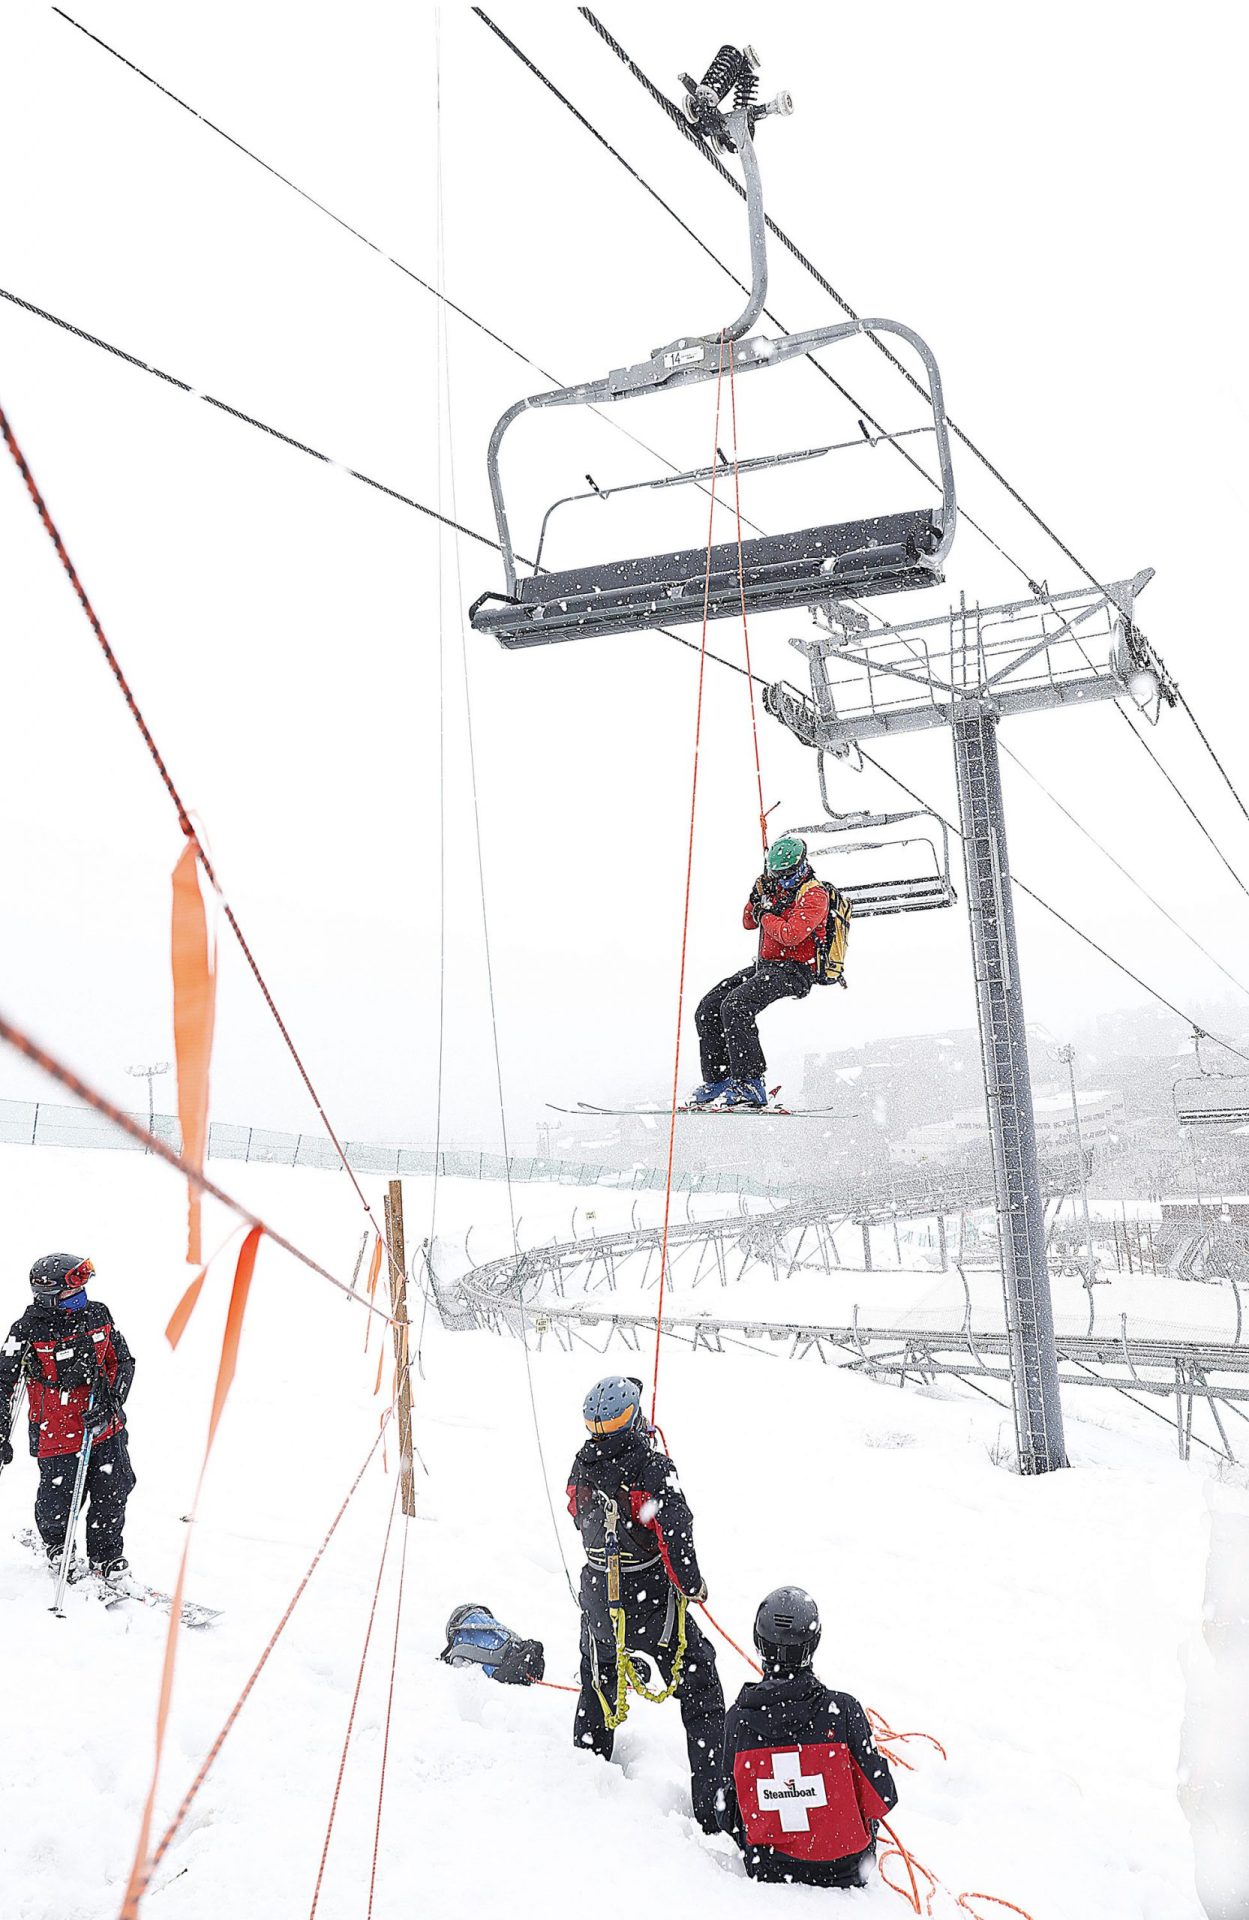 steamboat ski patrollers train to lower people to the ground with ropes if the chairlift breaks